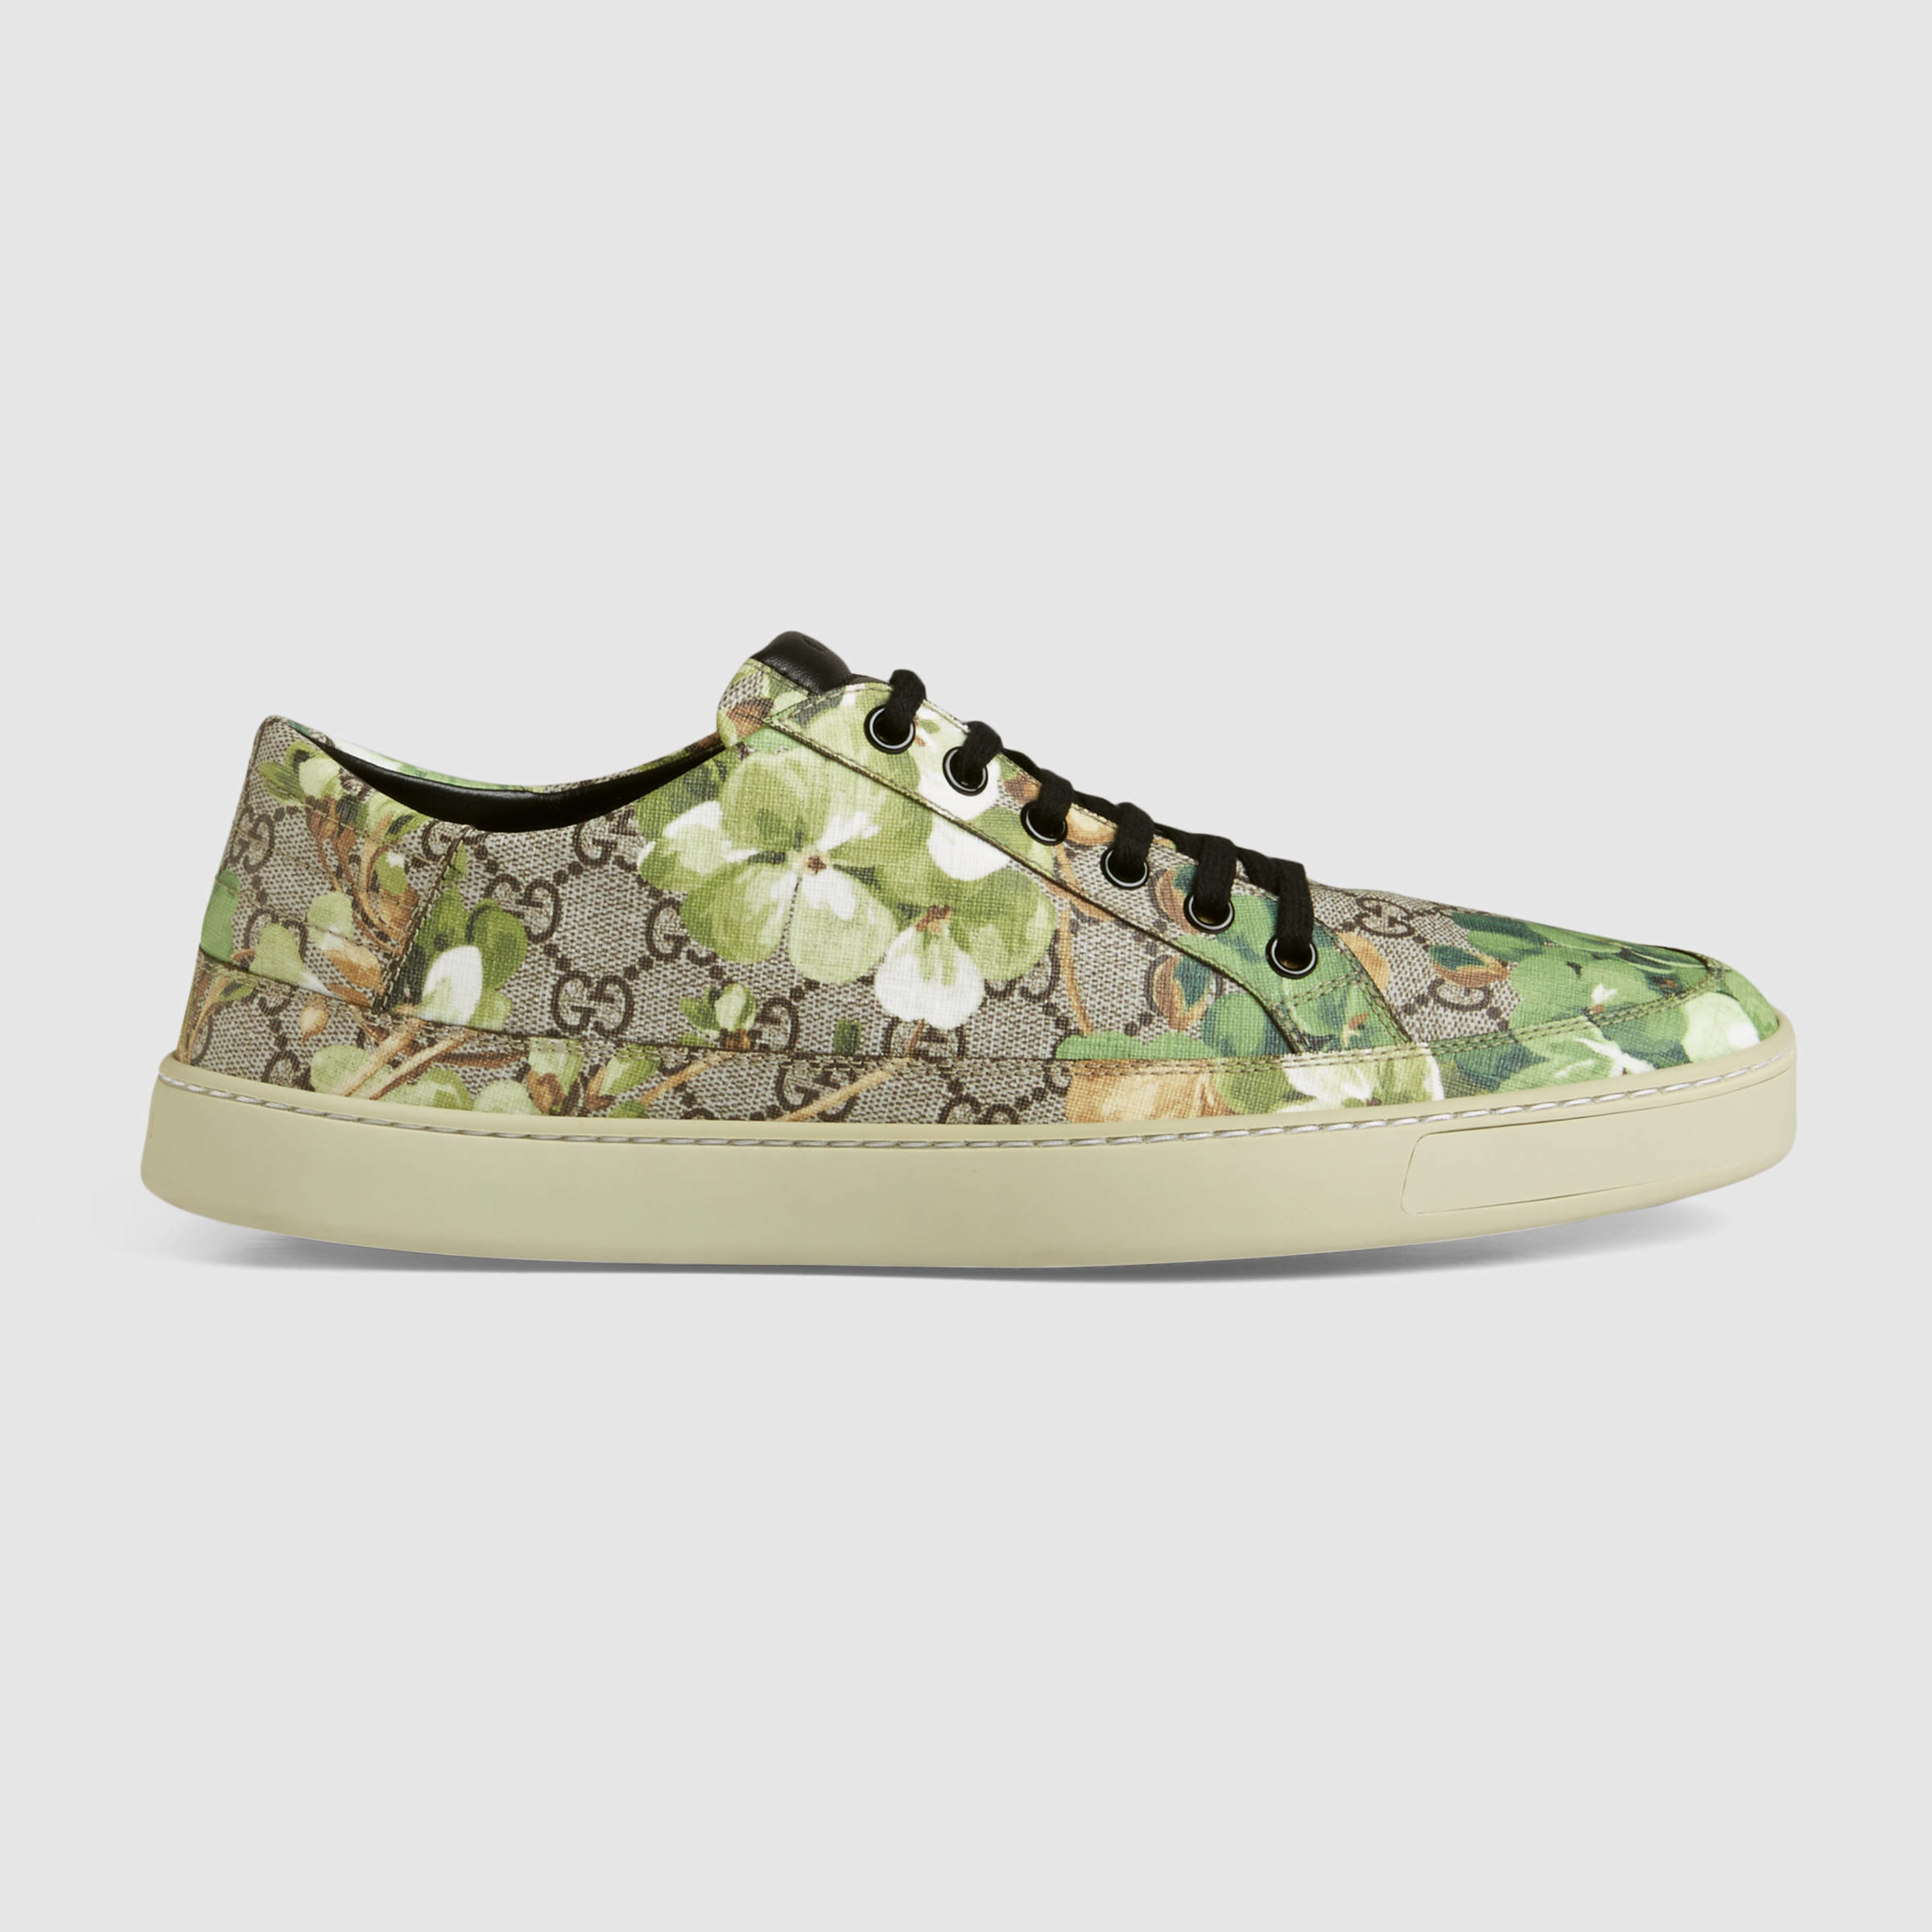 gucci bloom trainers